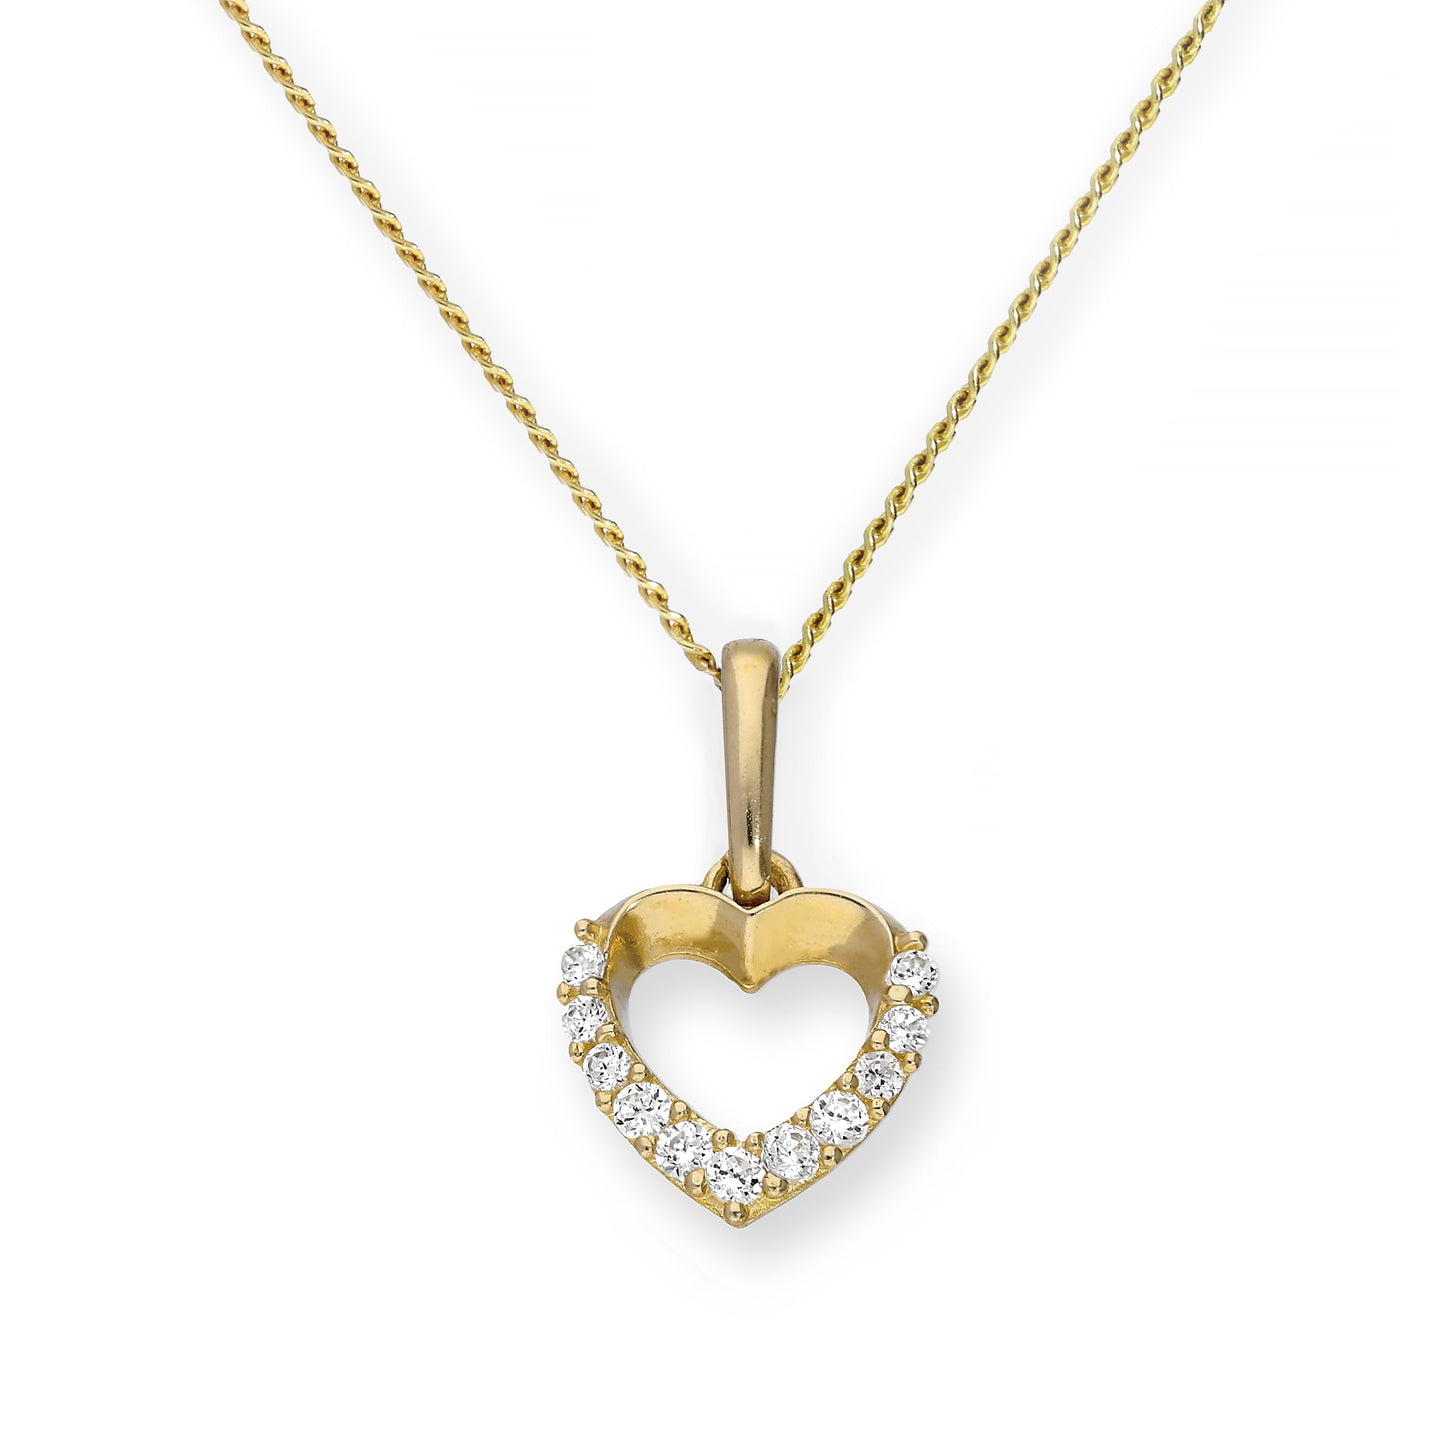 9ct Gold & Clear CZ Crystal Cut Out Heart Pendant Necklace